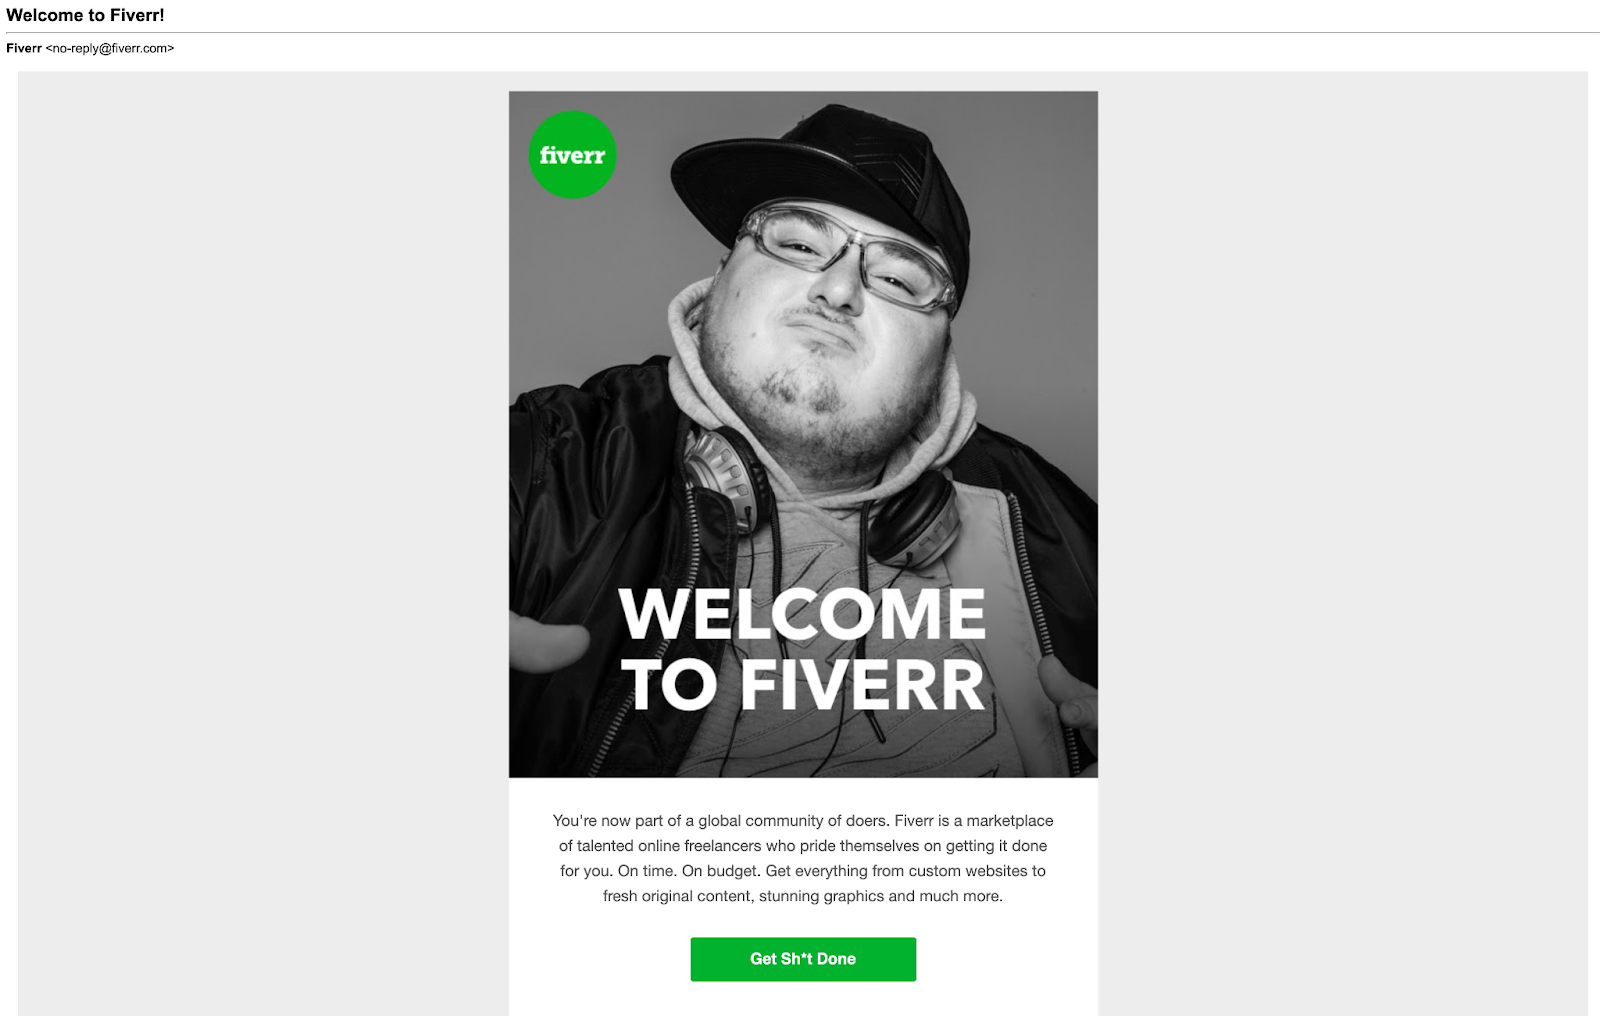 Fiverr's welcome onboarding email